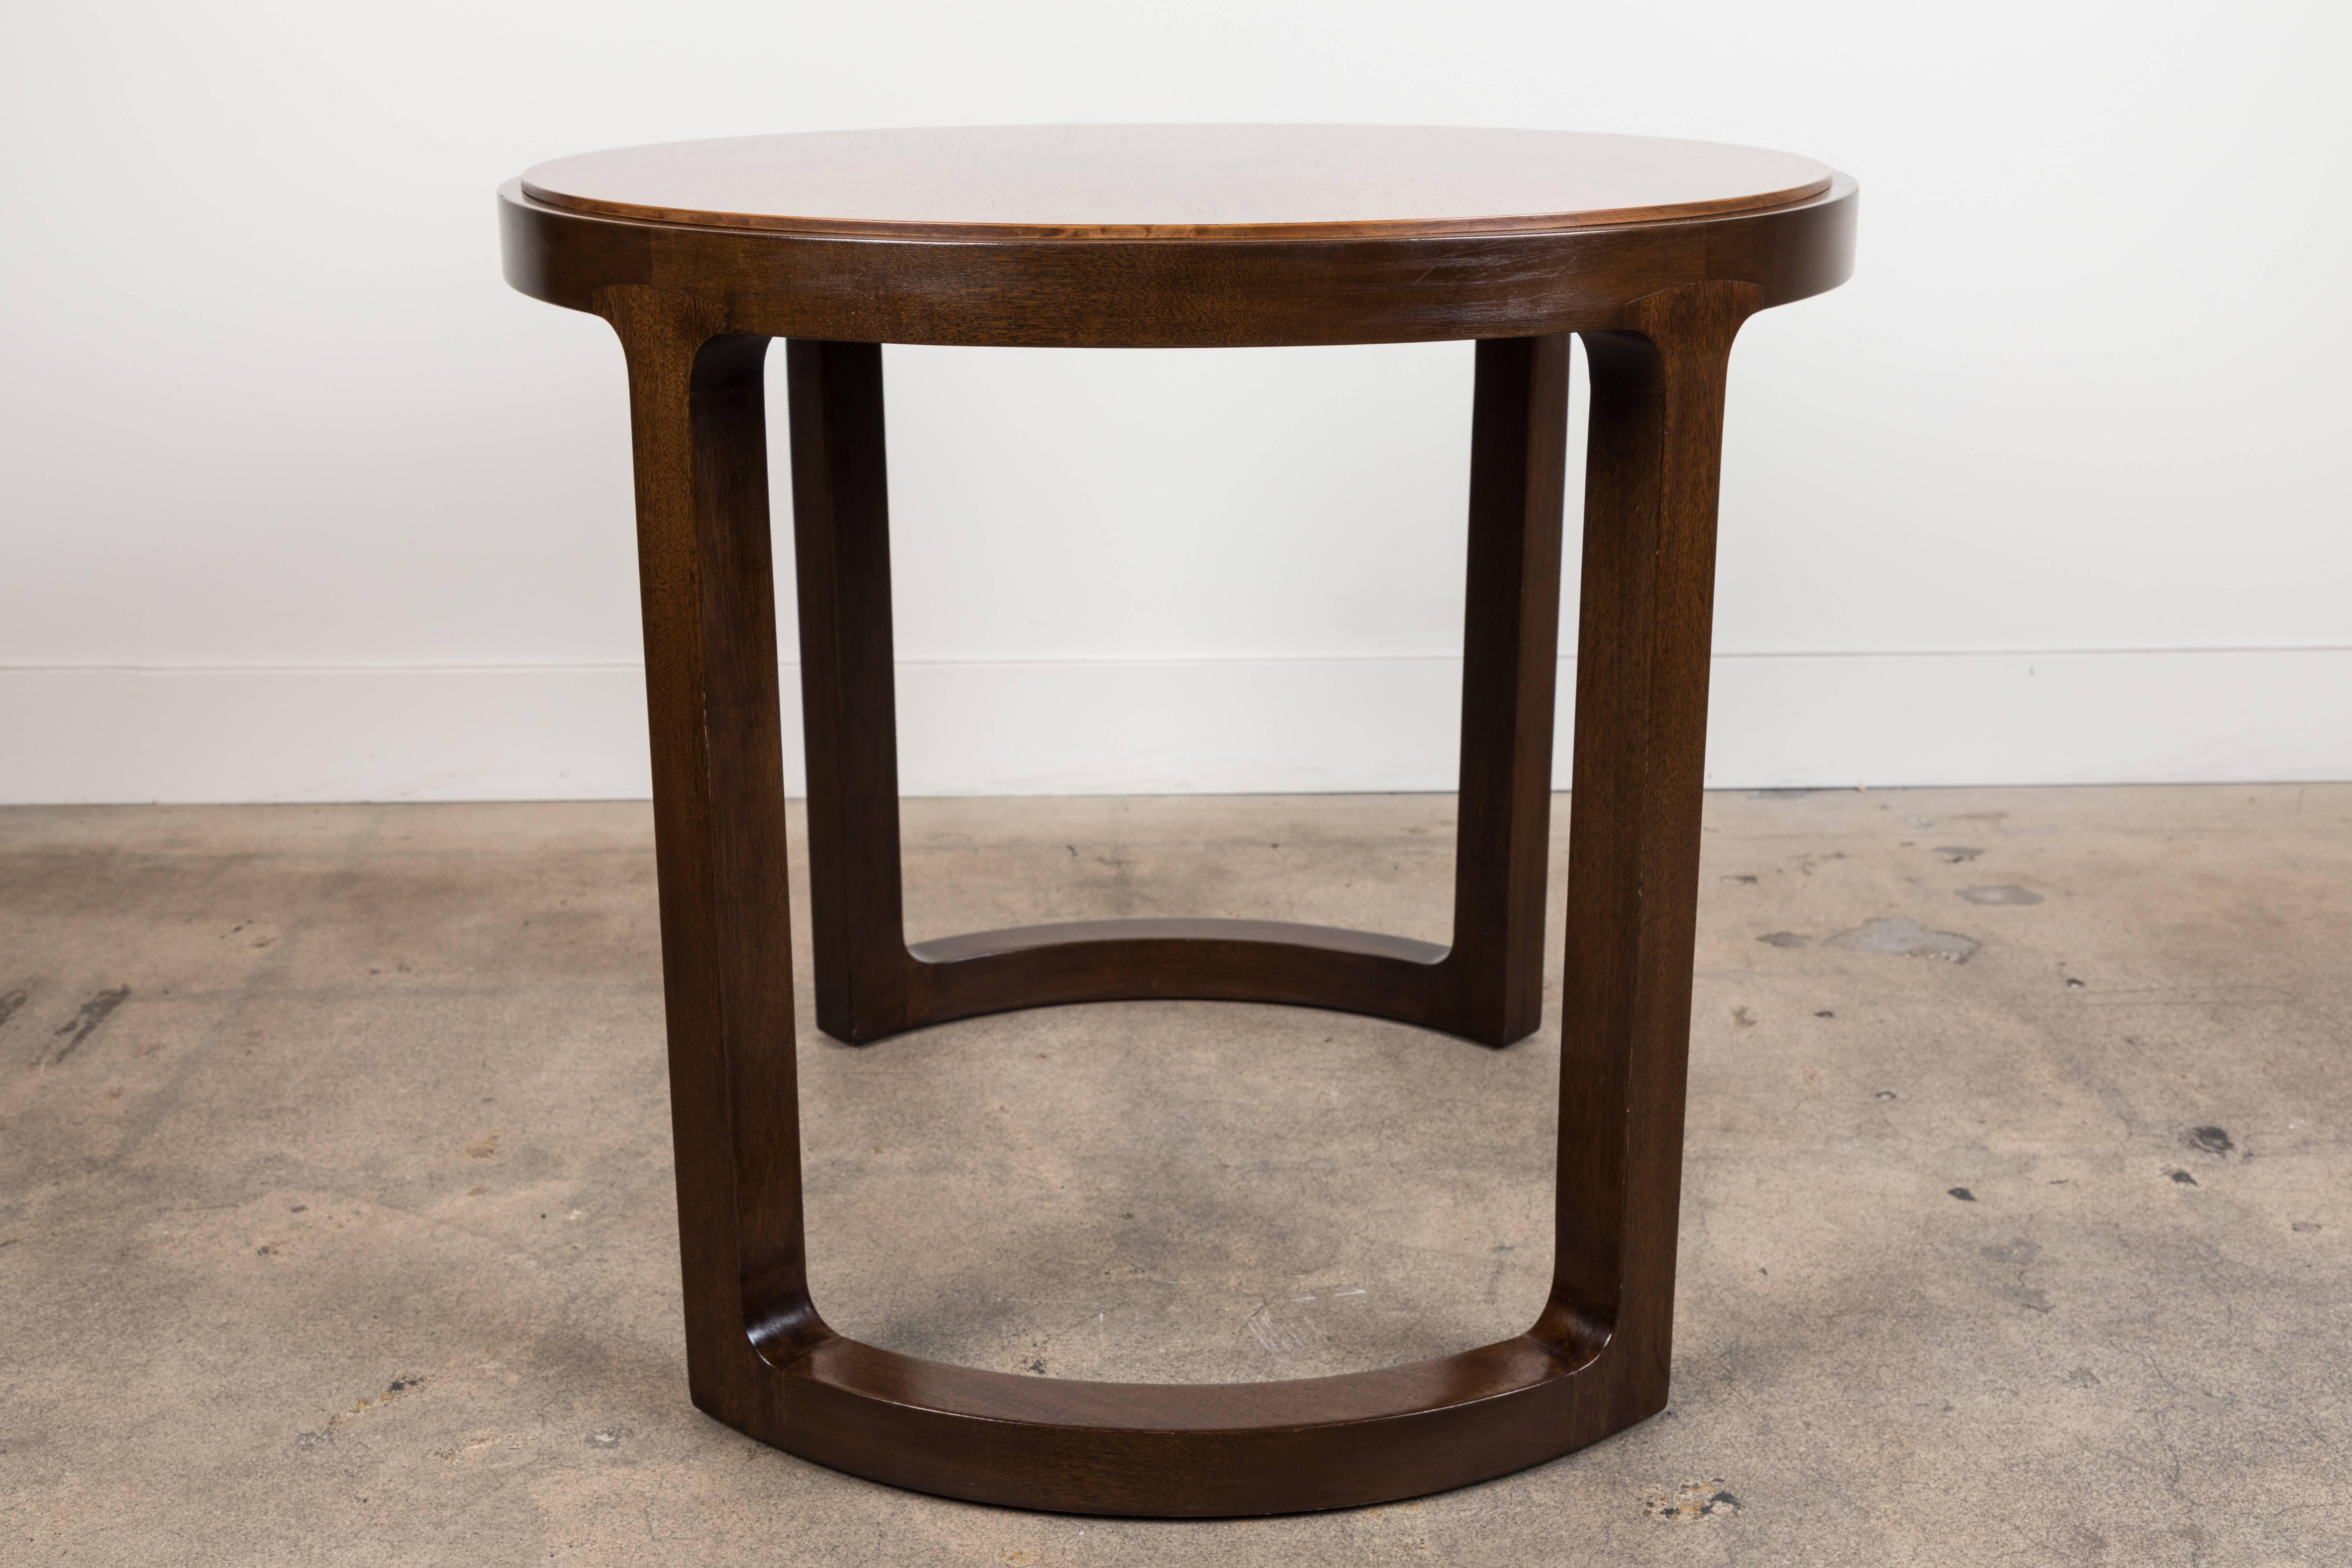 Pair of Rosewood and Mahogany Side Table by Edward Wormley for Dunbar 1